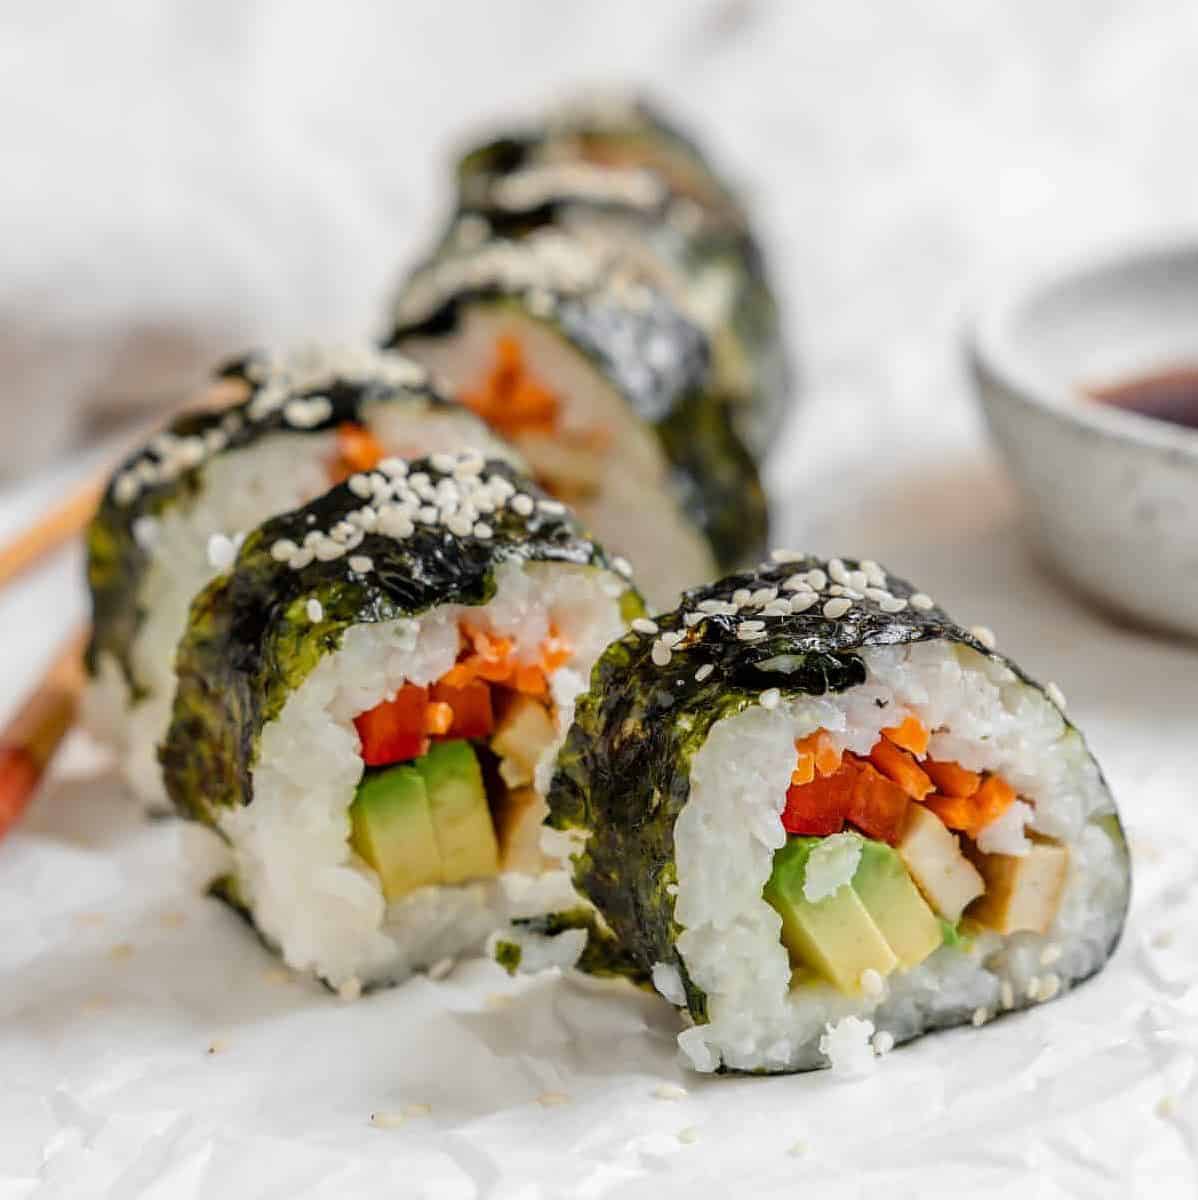  Featuring a variety of colorful veggies, these rolls are as beautiful as they are tasty.